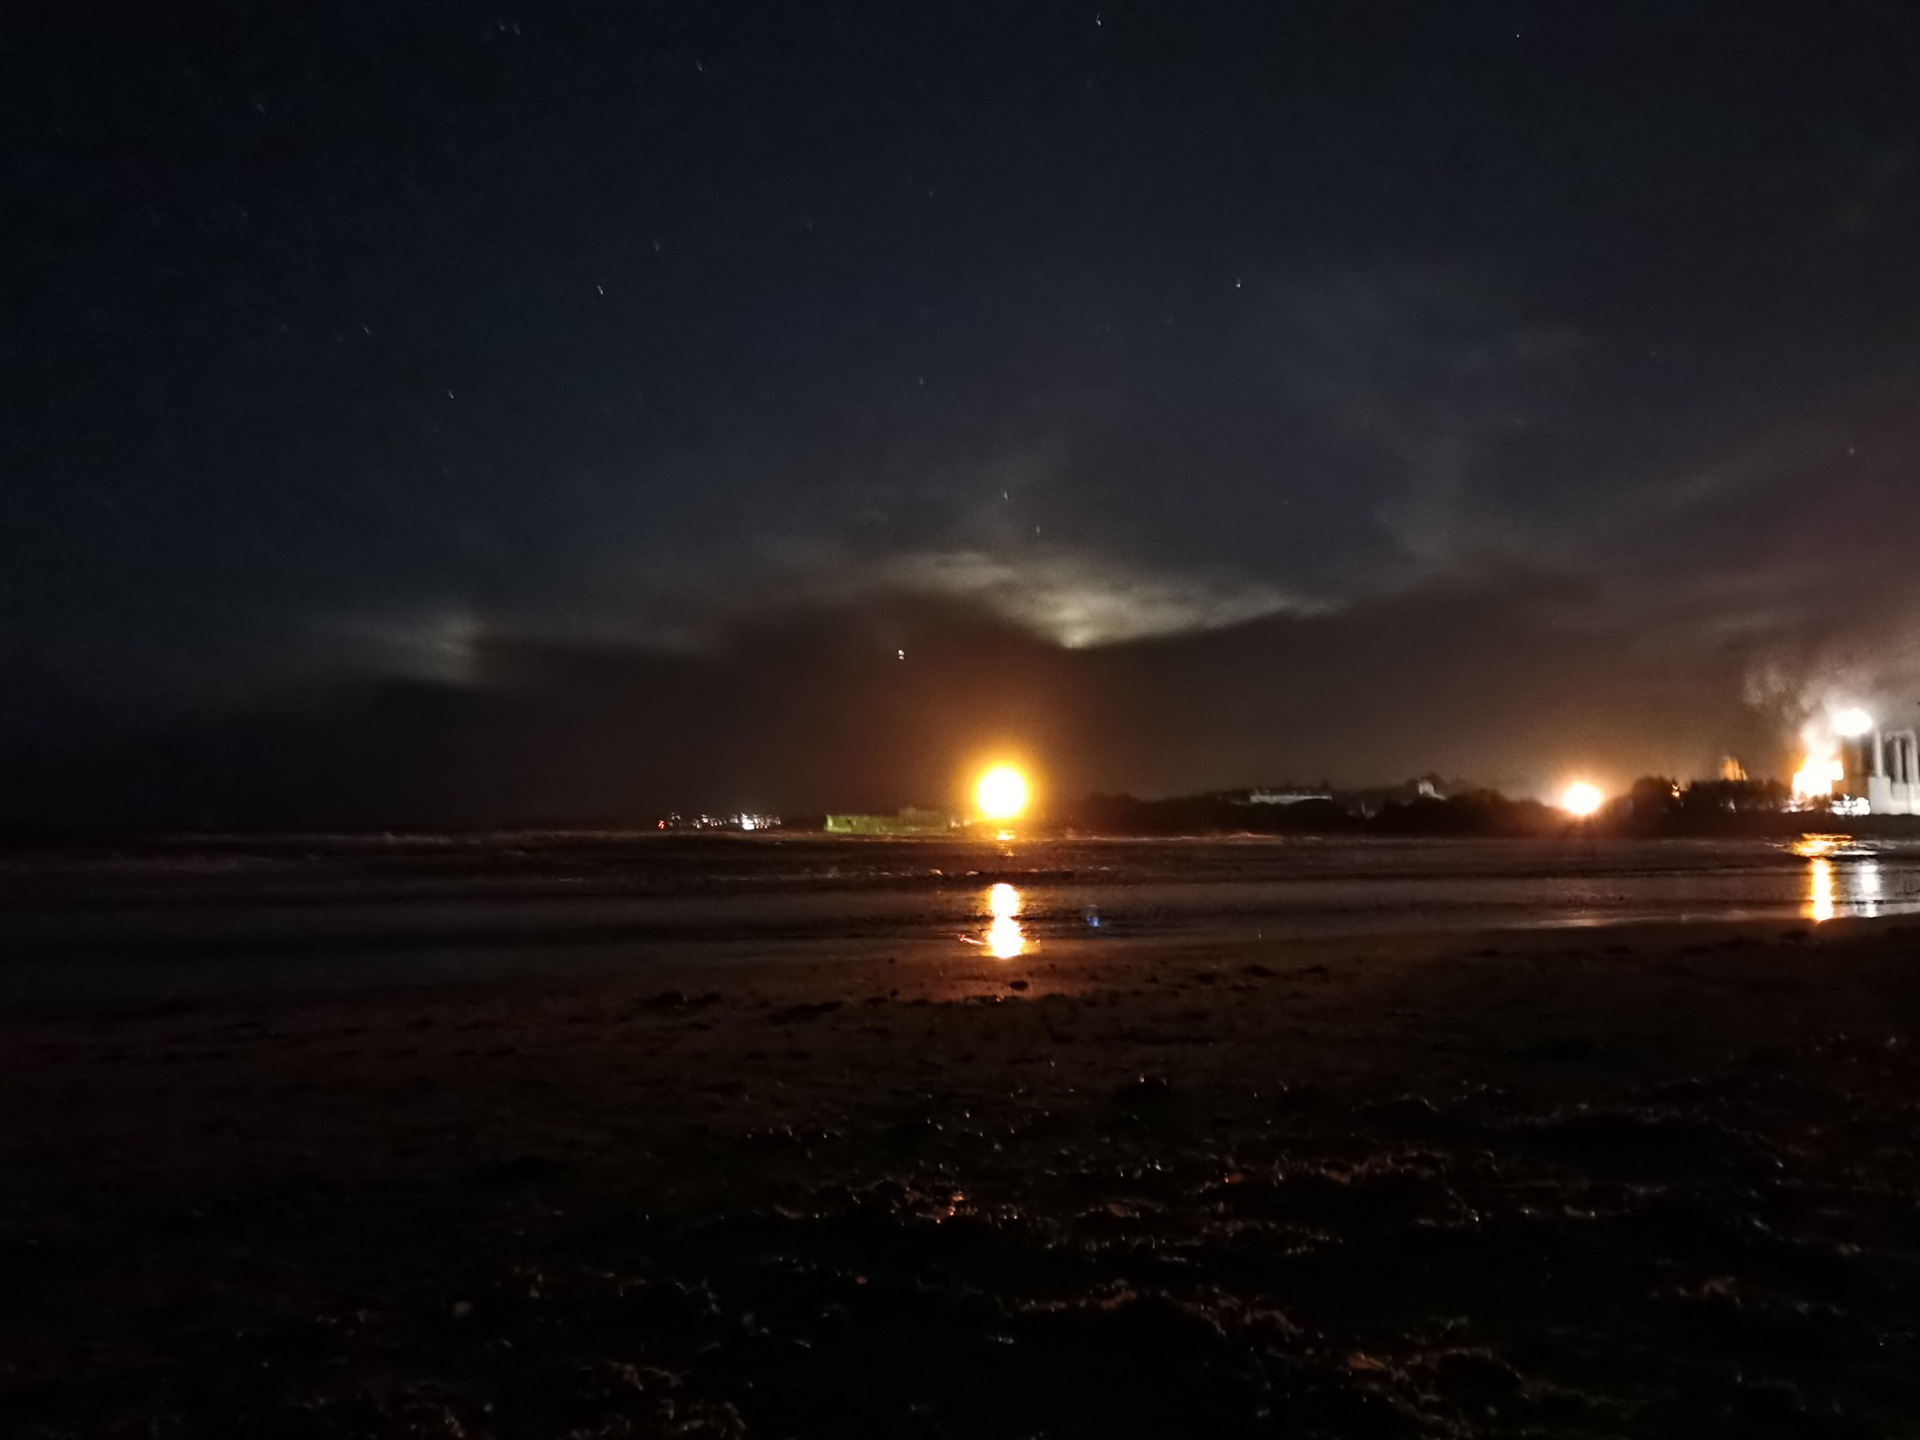 Huawei Mate 40 Pro night mode photo sample at a factory at the beach